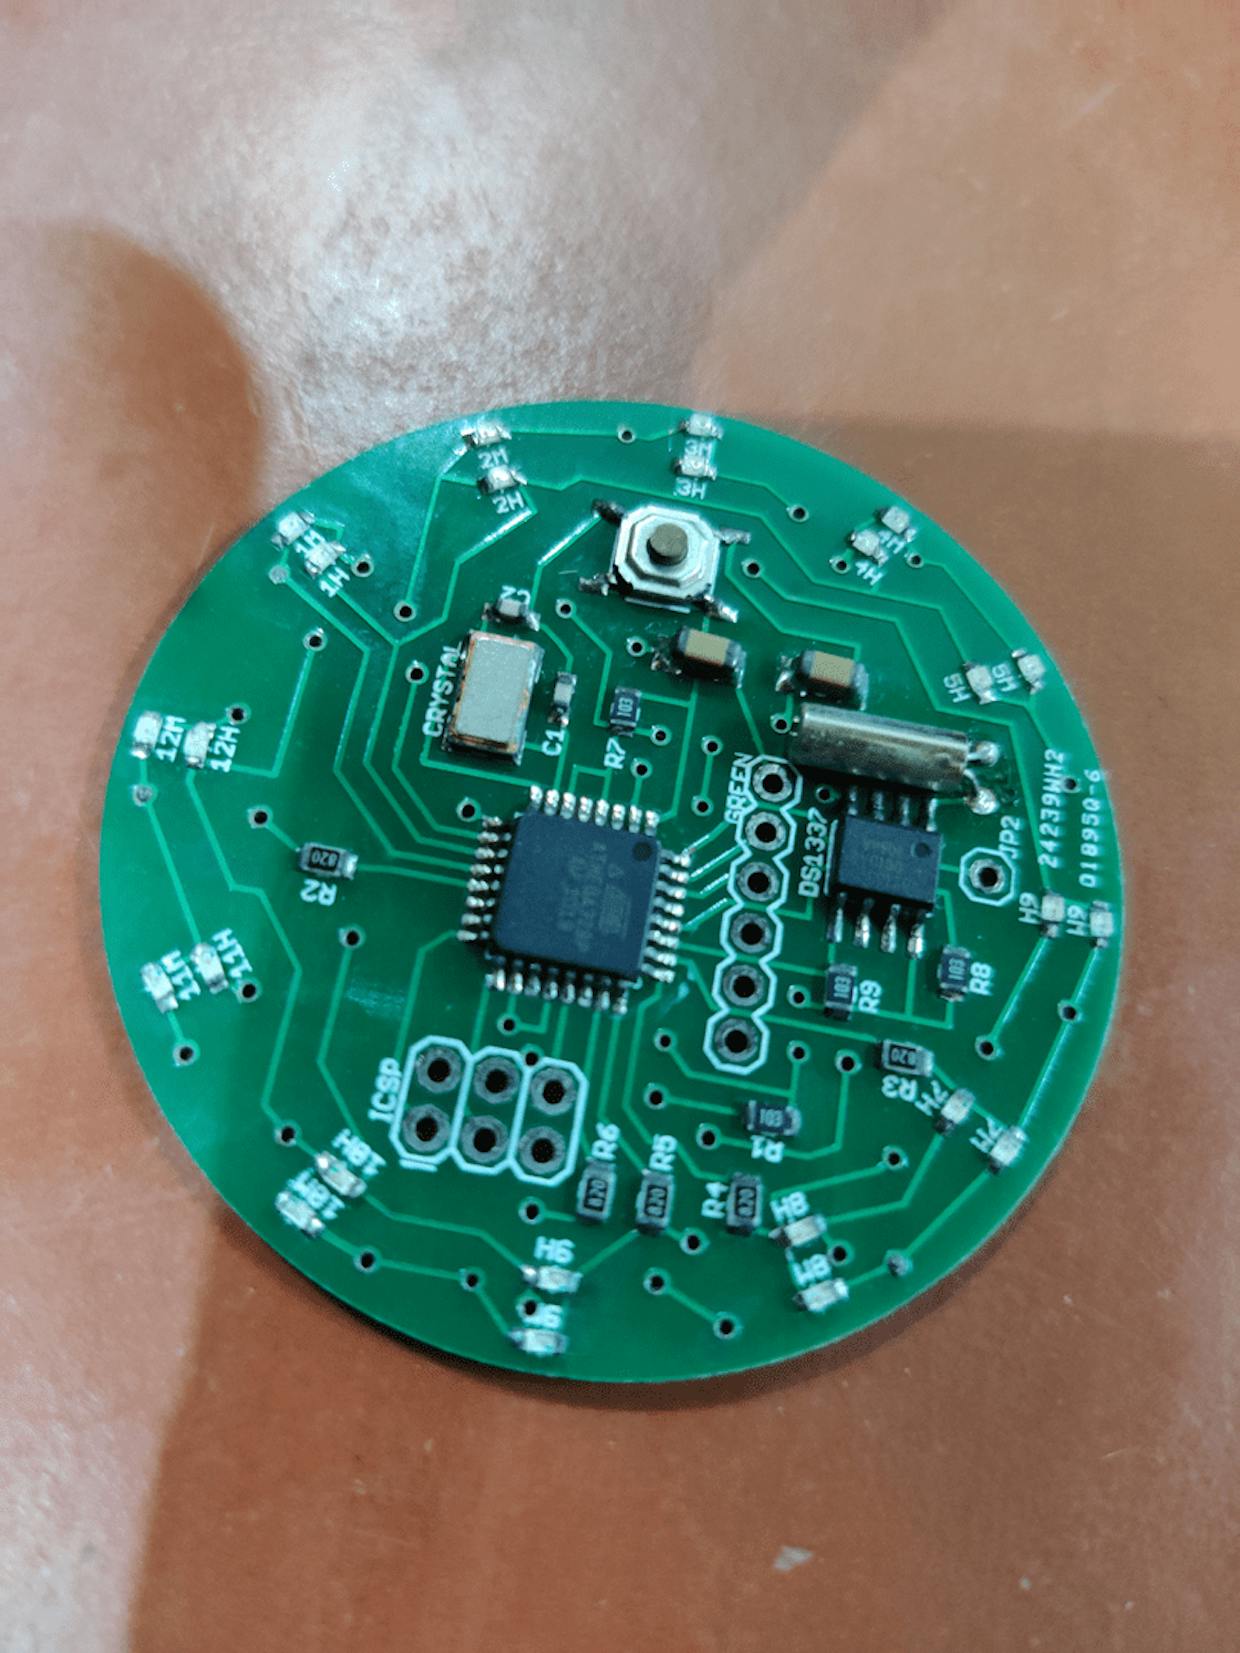 Watch, with Hour and Minute LEDs. and missing the battery holders (2 x CR2032)